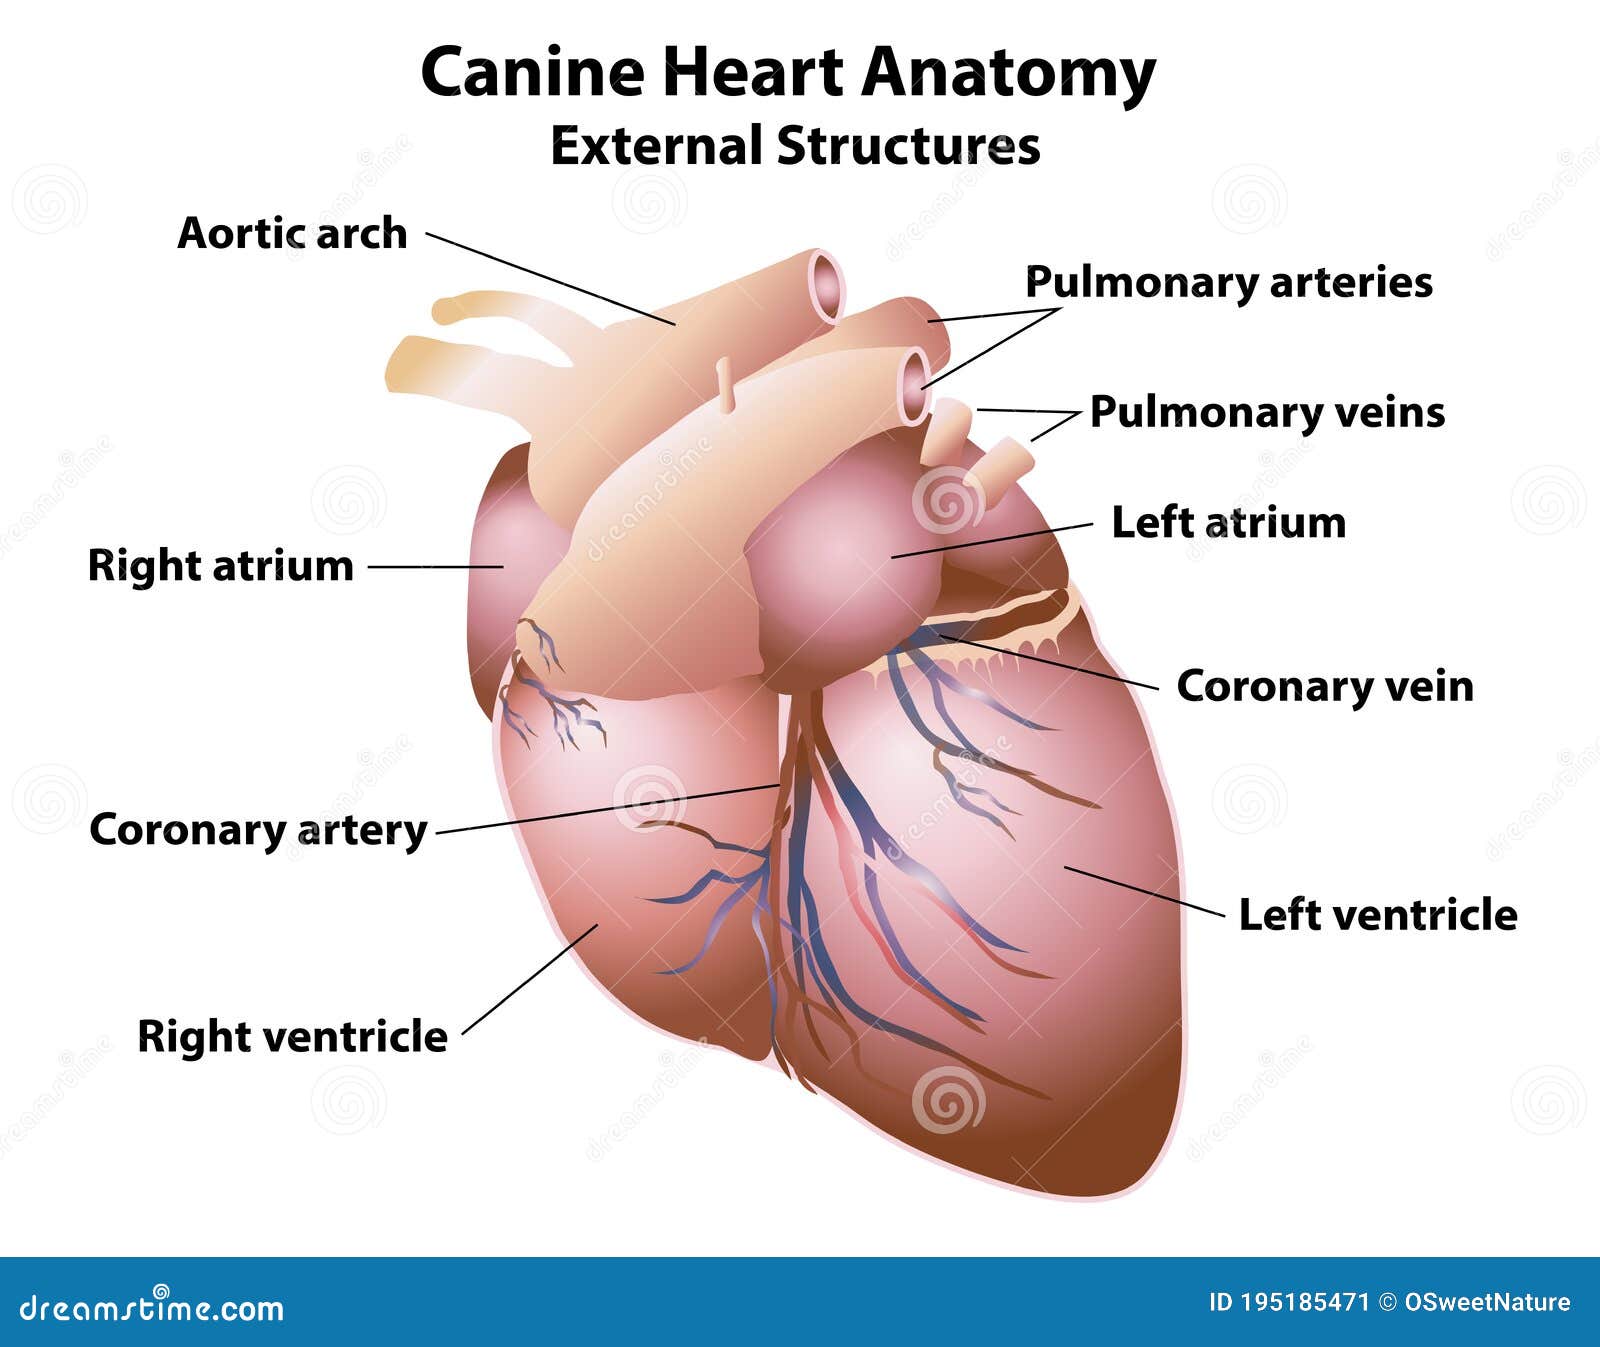 canine heart anatomy external structures